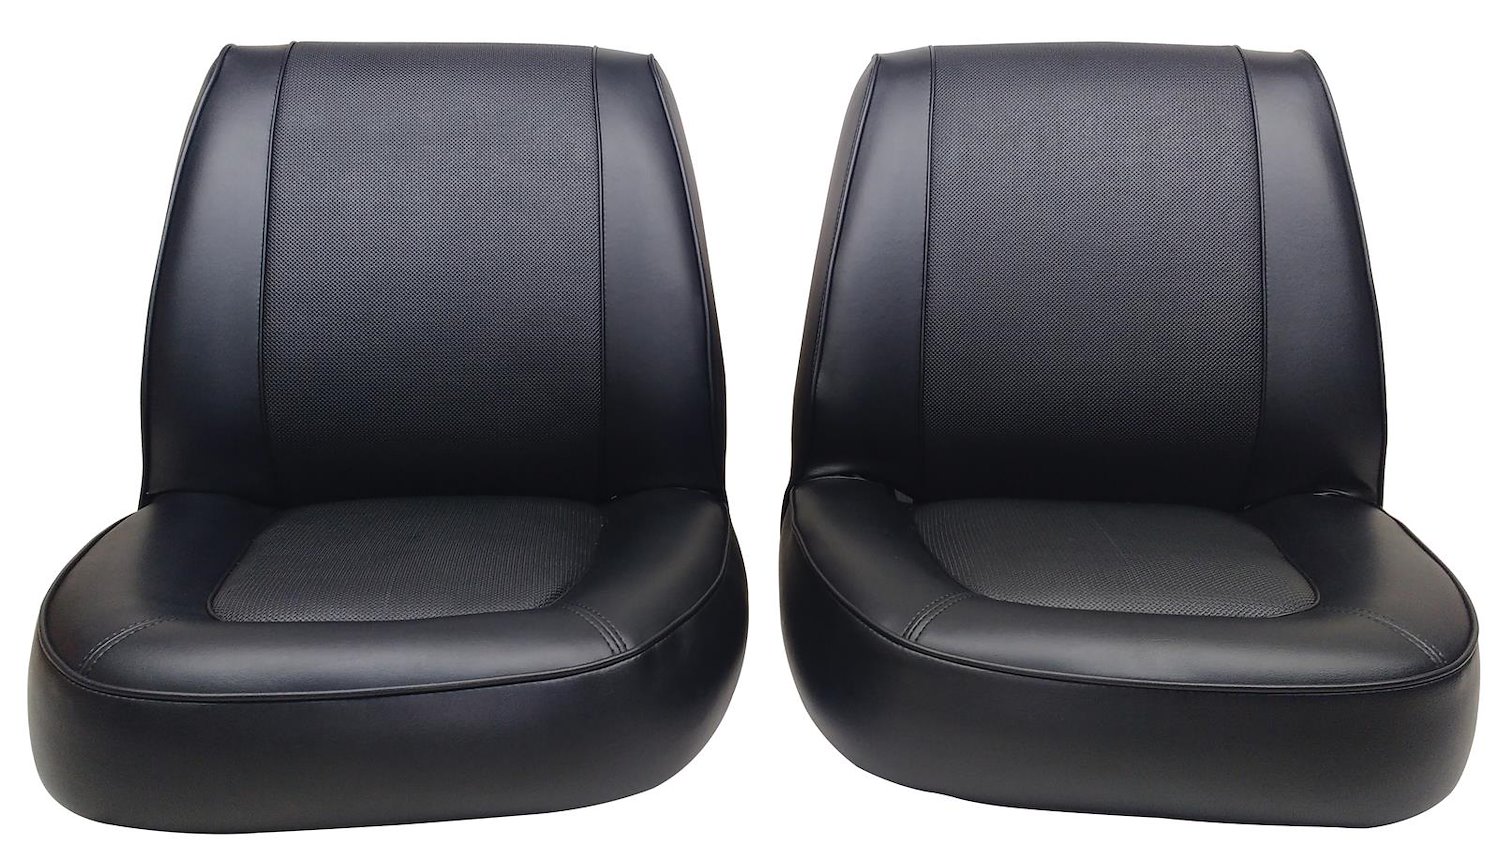 1966-1967 Ford Econoline Falcon Deluxe Club Wagon Interior Front Bucket Seat Upholstery Set